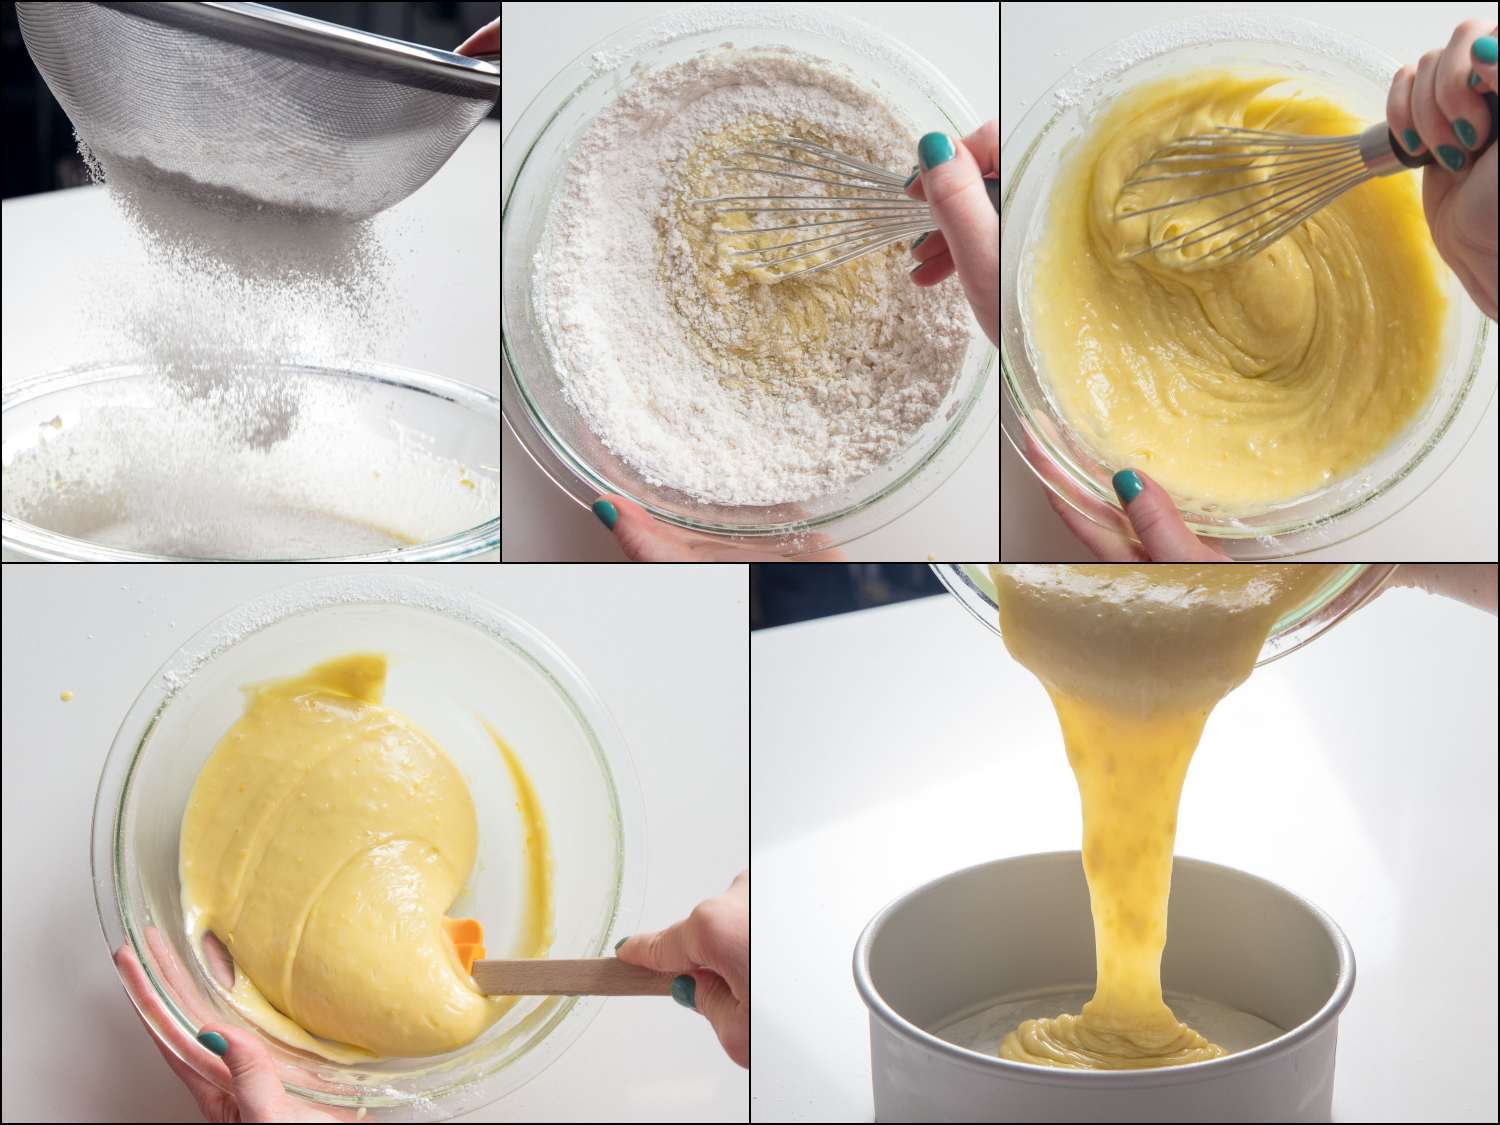 A photo collage showing sifting cake flour into wet ingredients, whisking well, giving it a final stir, and pouring into a cake pan.